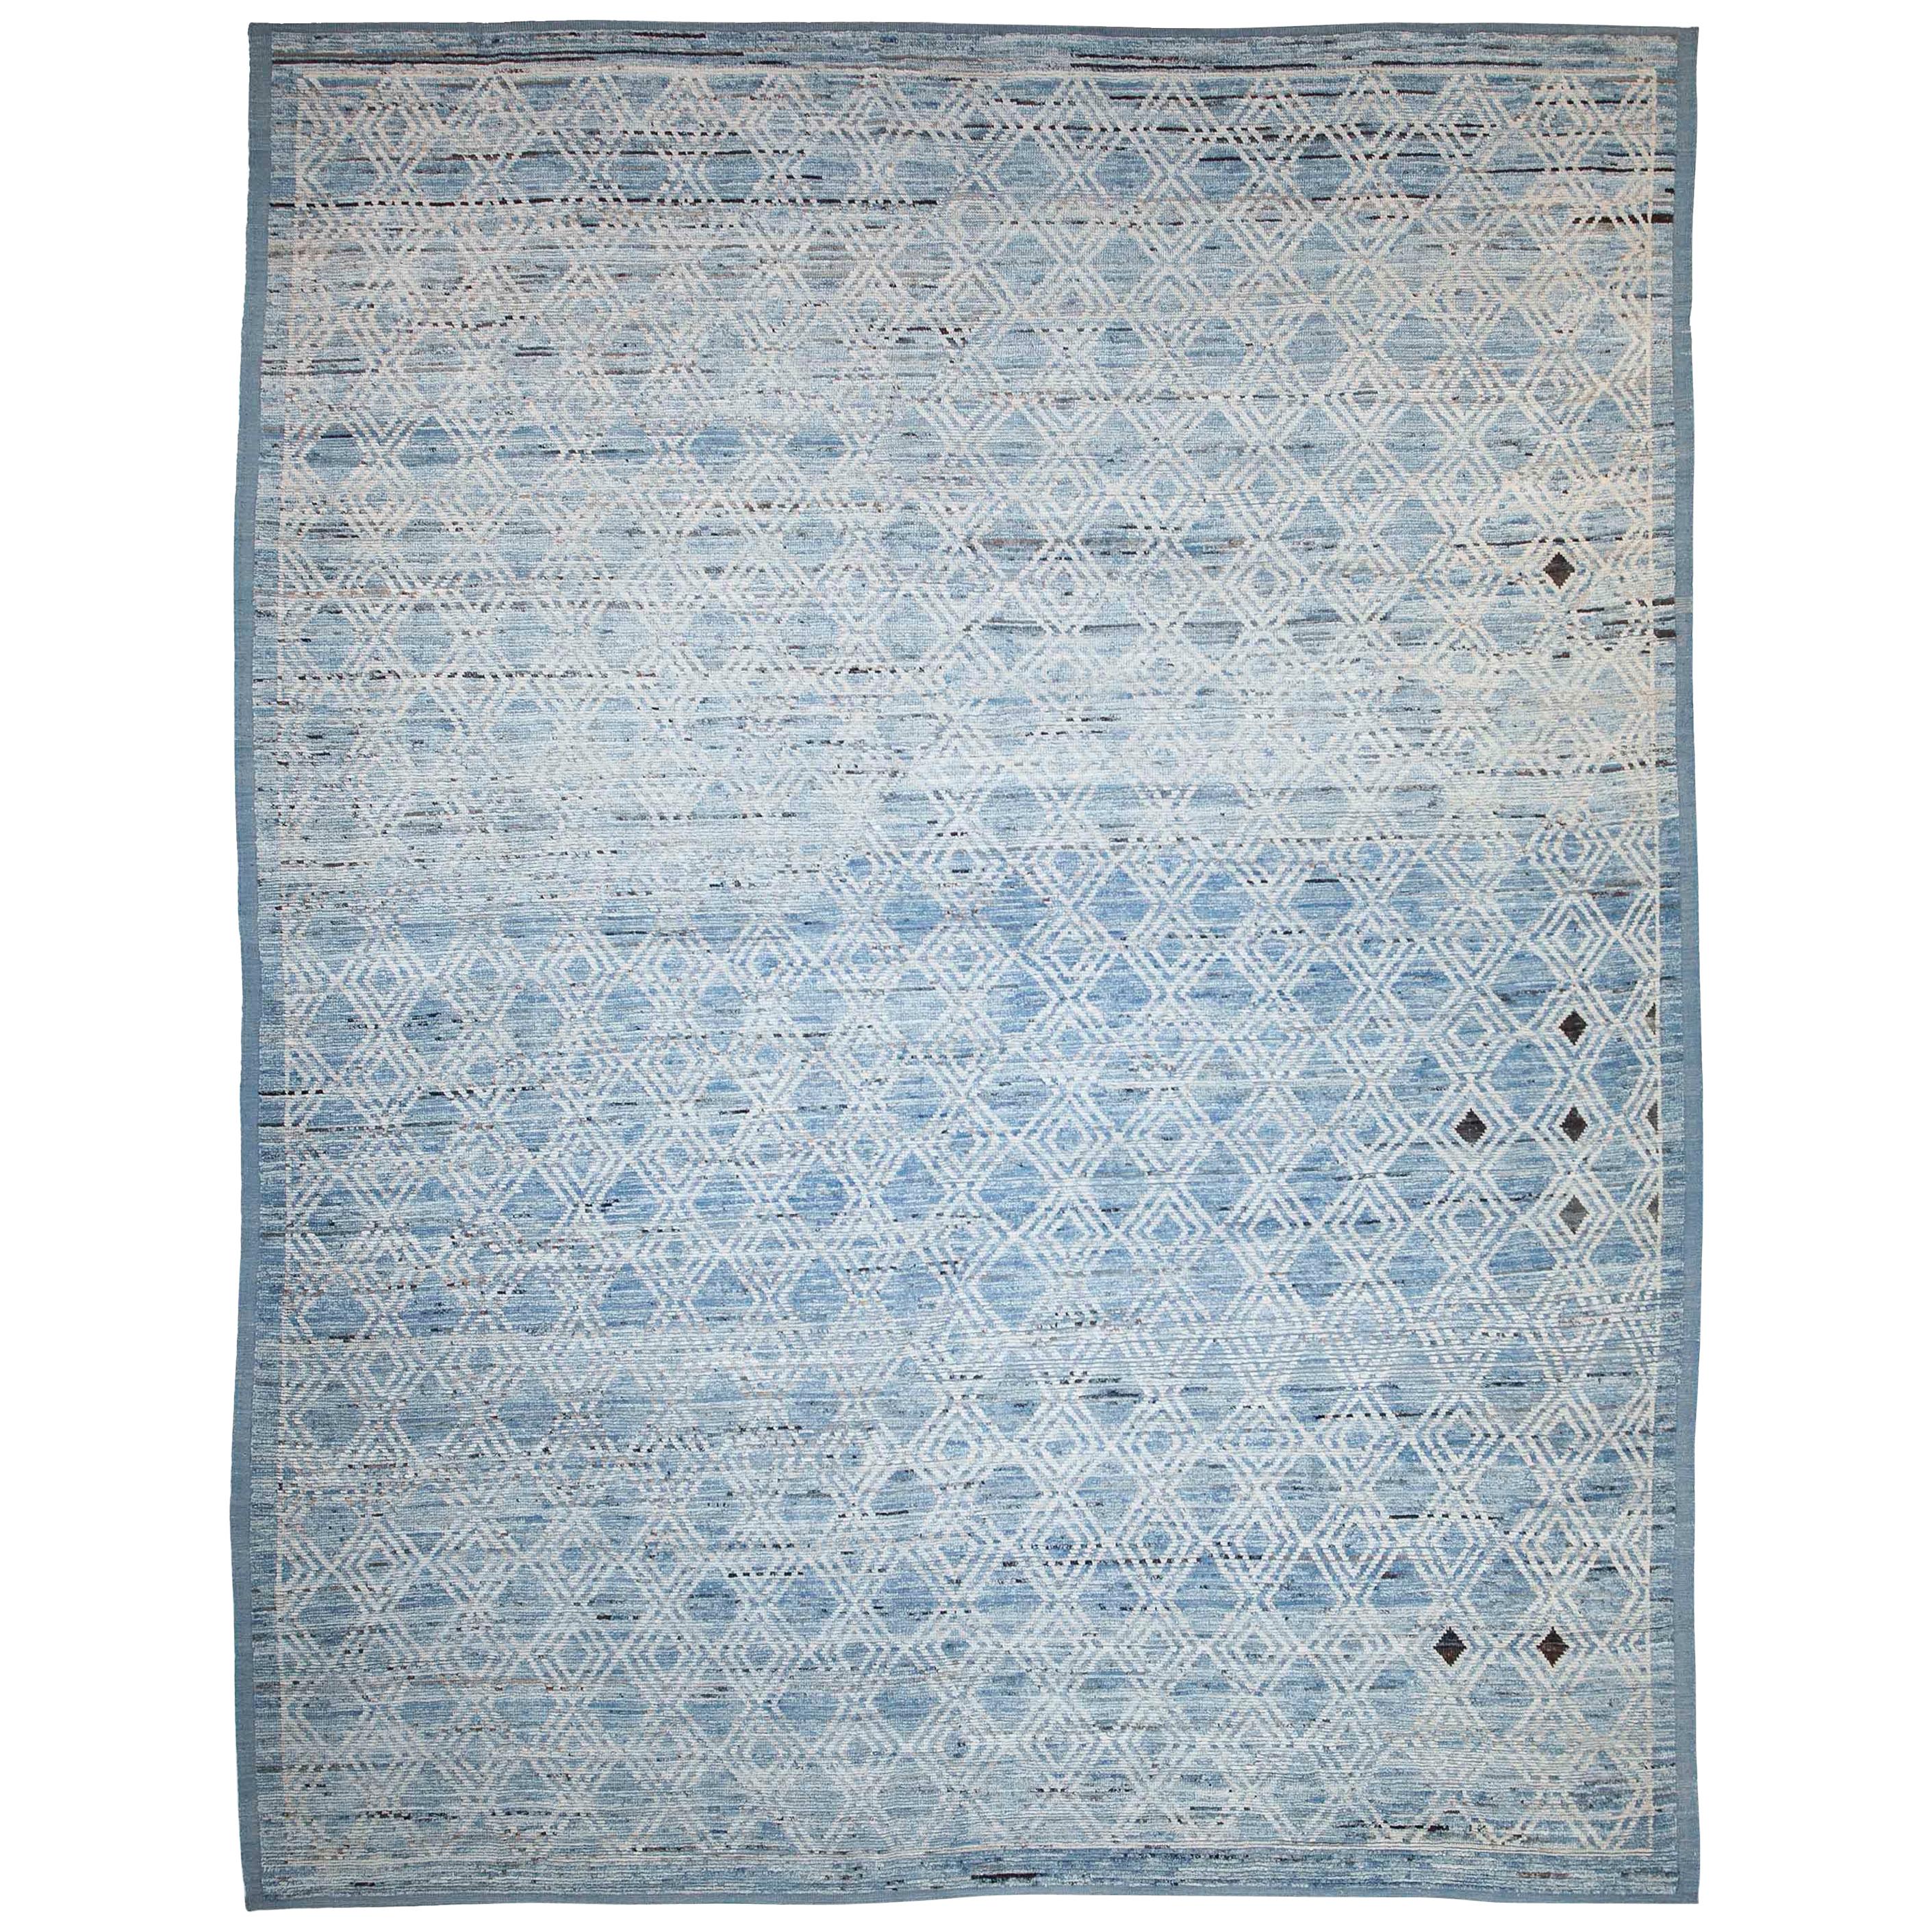 Afghan Moroccan Style Rug with White and Black Diamonds on Blue Field For Sale